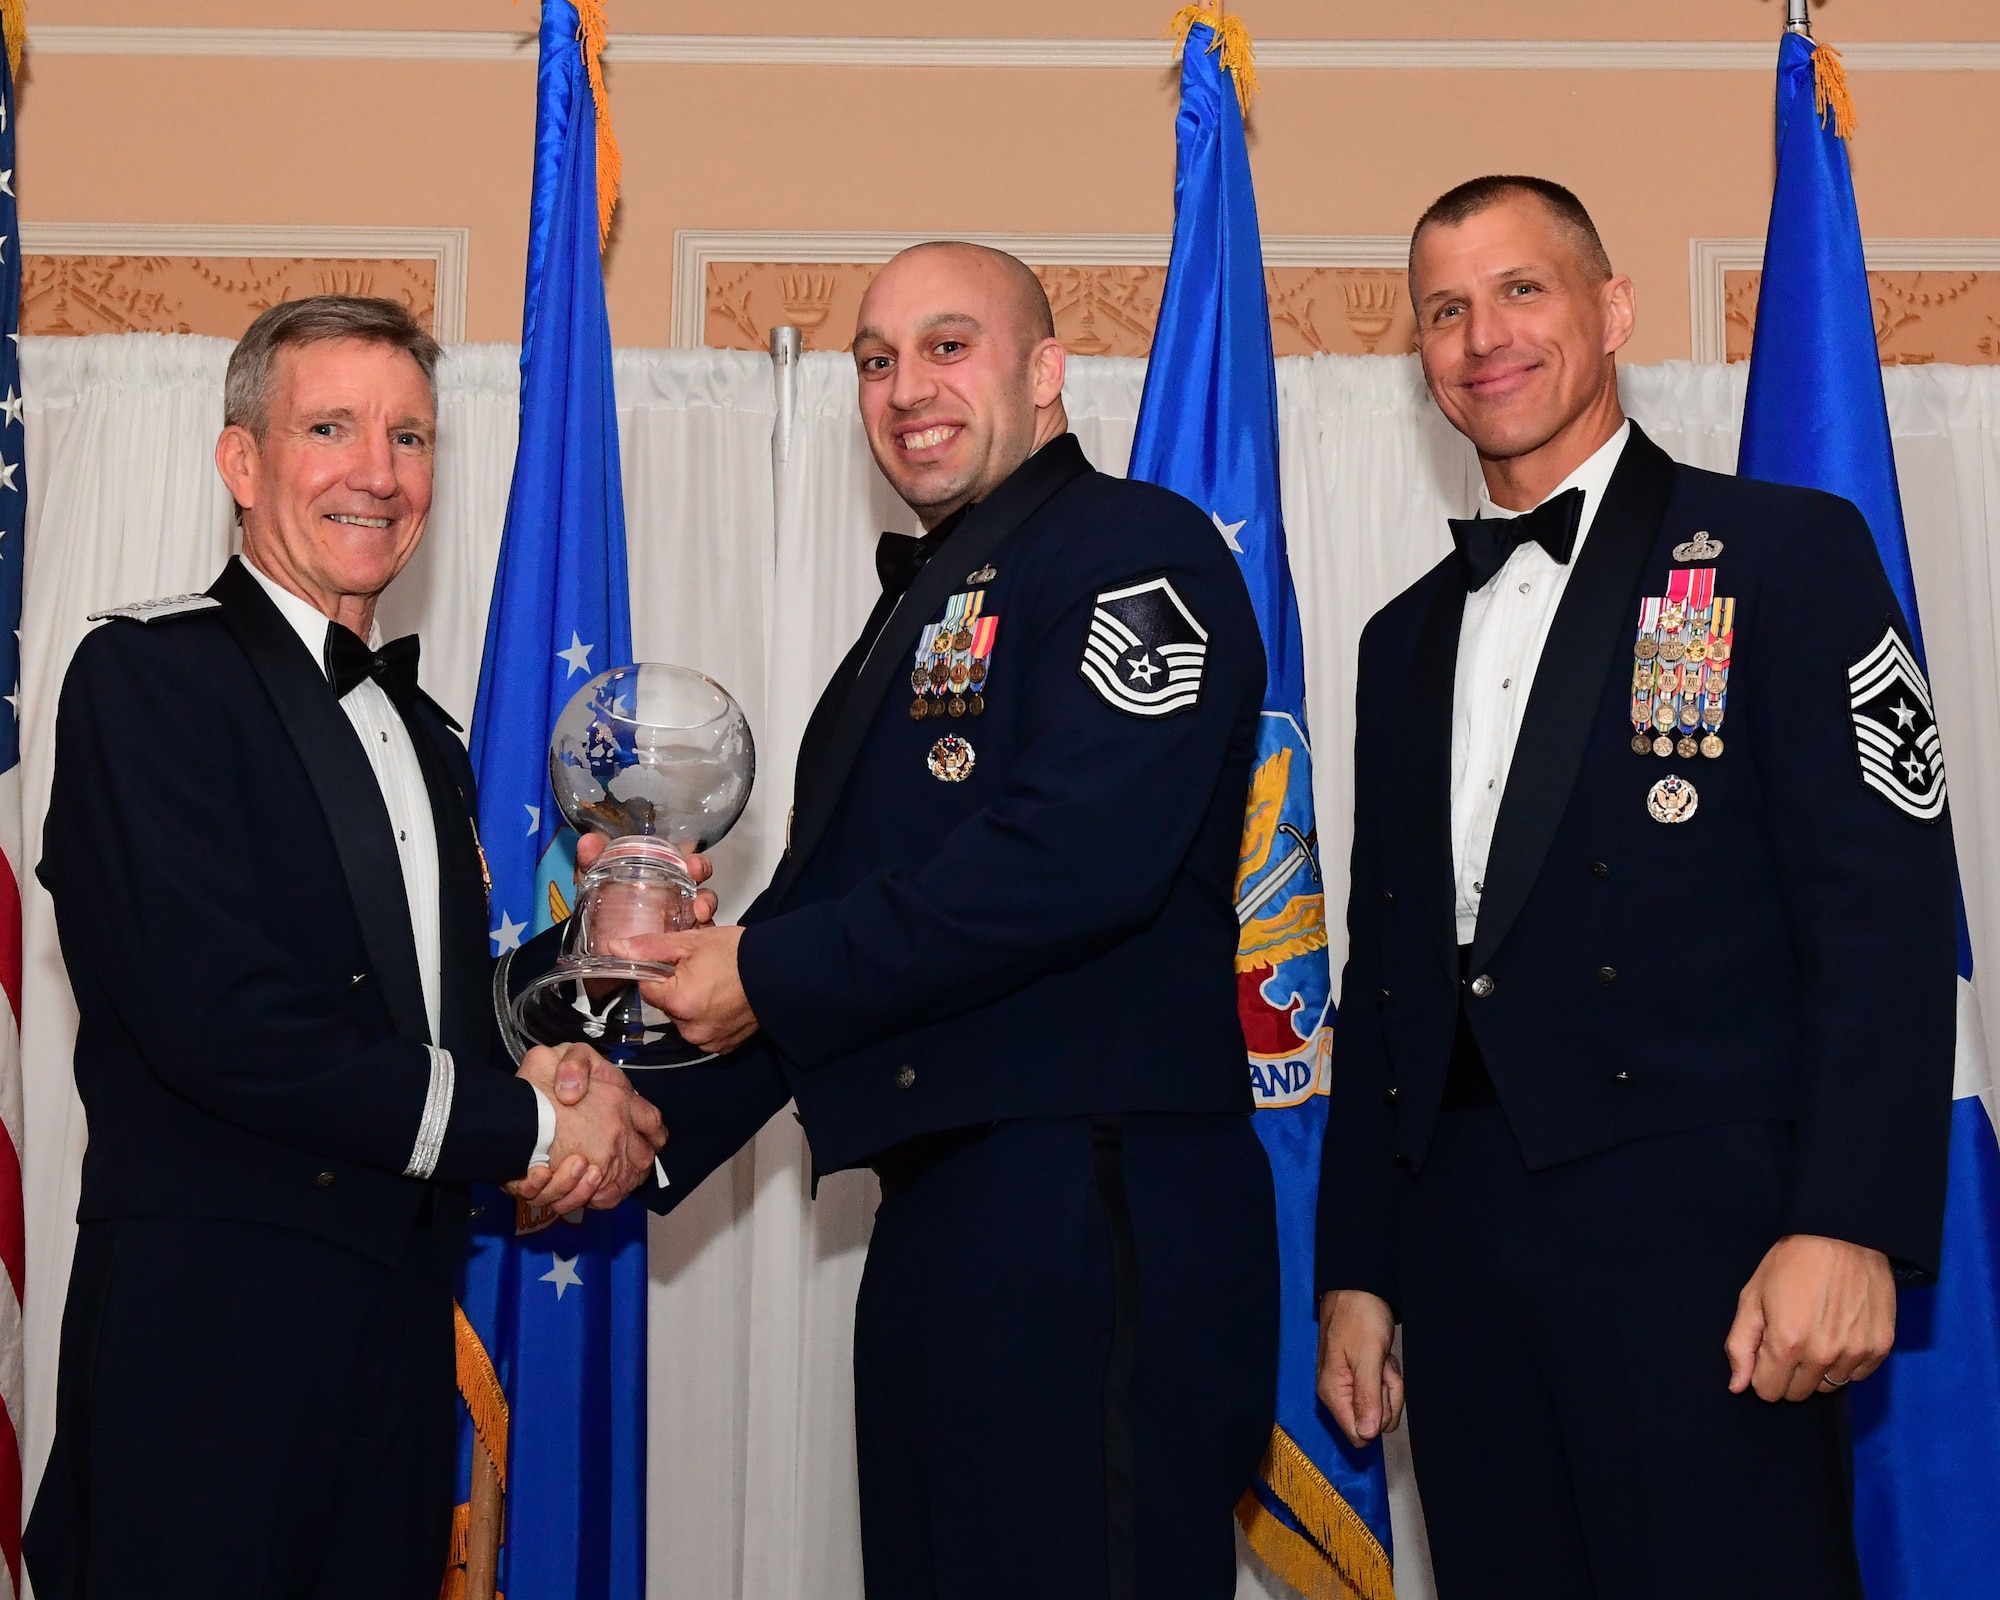 Gen. Hawk Carlisle, commander, Air Combat Command presents an award to Master Sgt. Josh Malyemezian, 55th Contracting Station assistant chief of the contingency support flight, Offutt Air Force Base, Nebraska, as Chief Master Sgt. Steve McDonald, command chief, ACC, observes during the 2017 Outstanding Airmen of the Year banquet at the Bayview Community Center at Langley AFB, Virginia, March 8, 2017. The award recognizes 12 outstanding enlisted service members for superior leadership, job performance, community involvement and personal achievements. (U.S. Air Force photo by Staff Sgt. Nick Wilson)